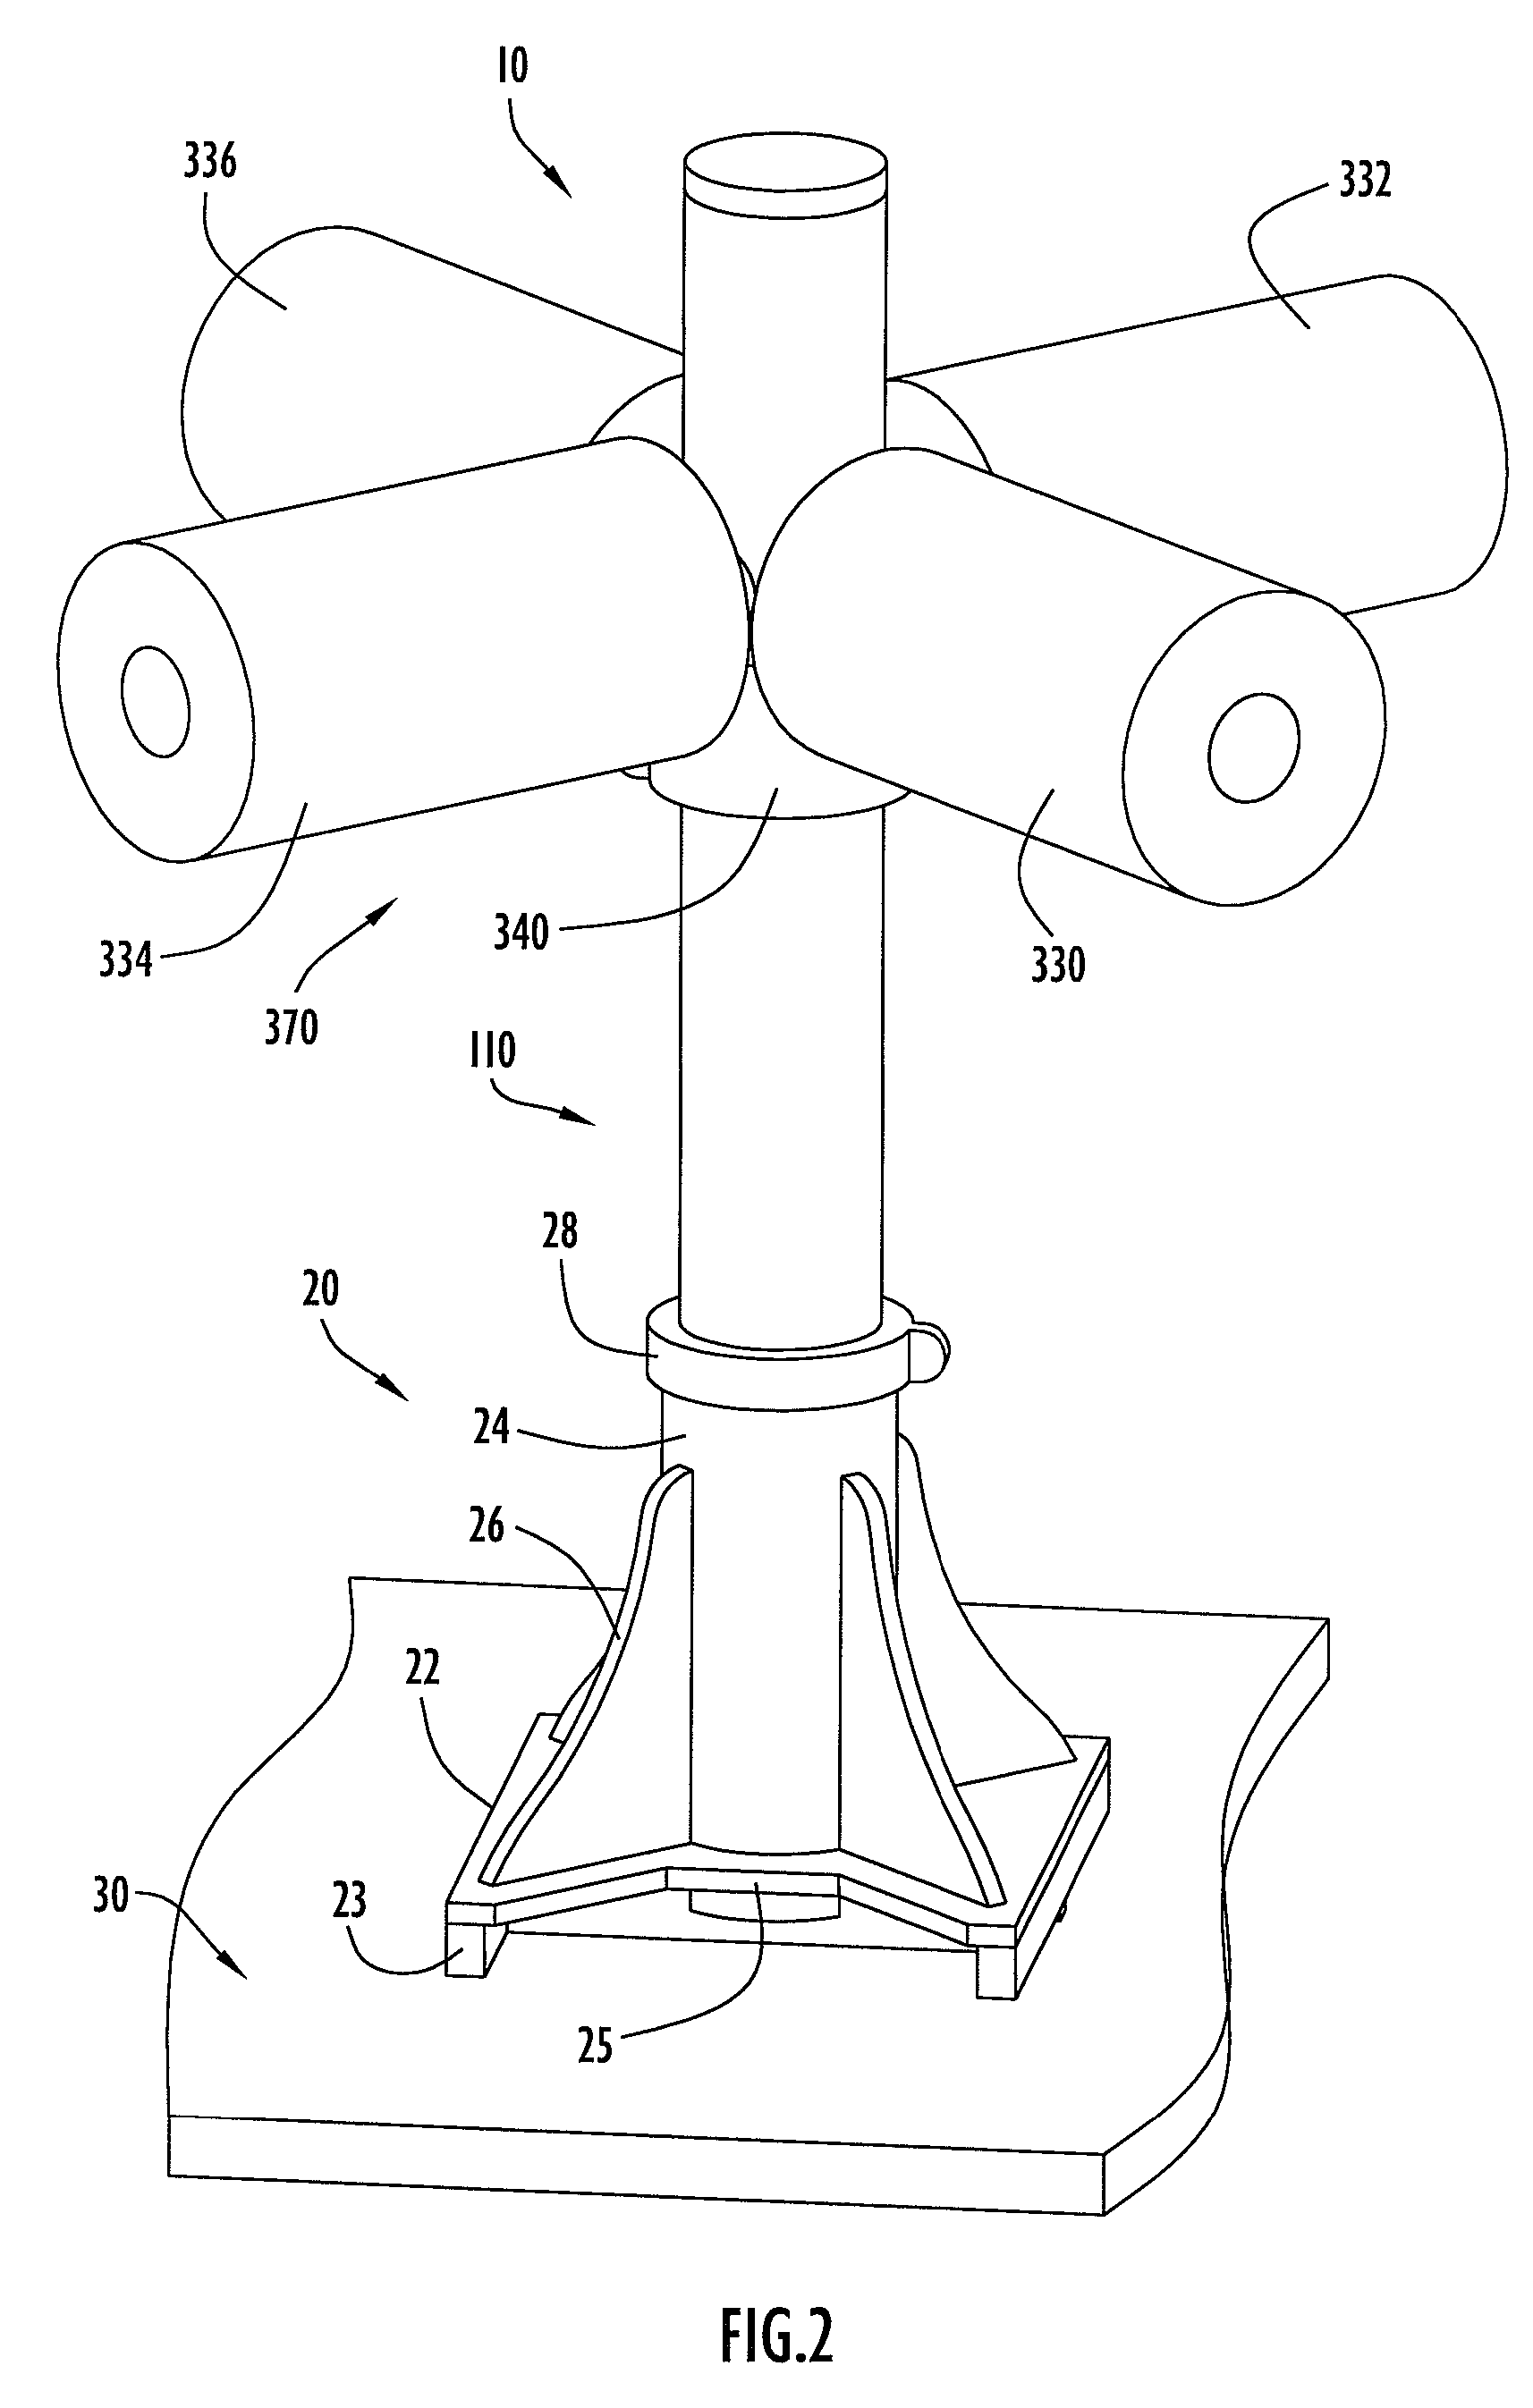 Method and Apparatus for Operatively Controlling a Virtual Reality Scenario in Accordance With Physical Activity of a User